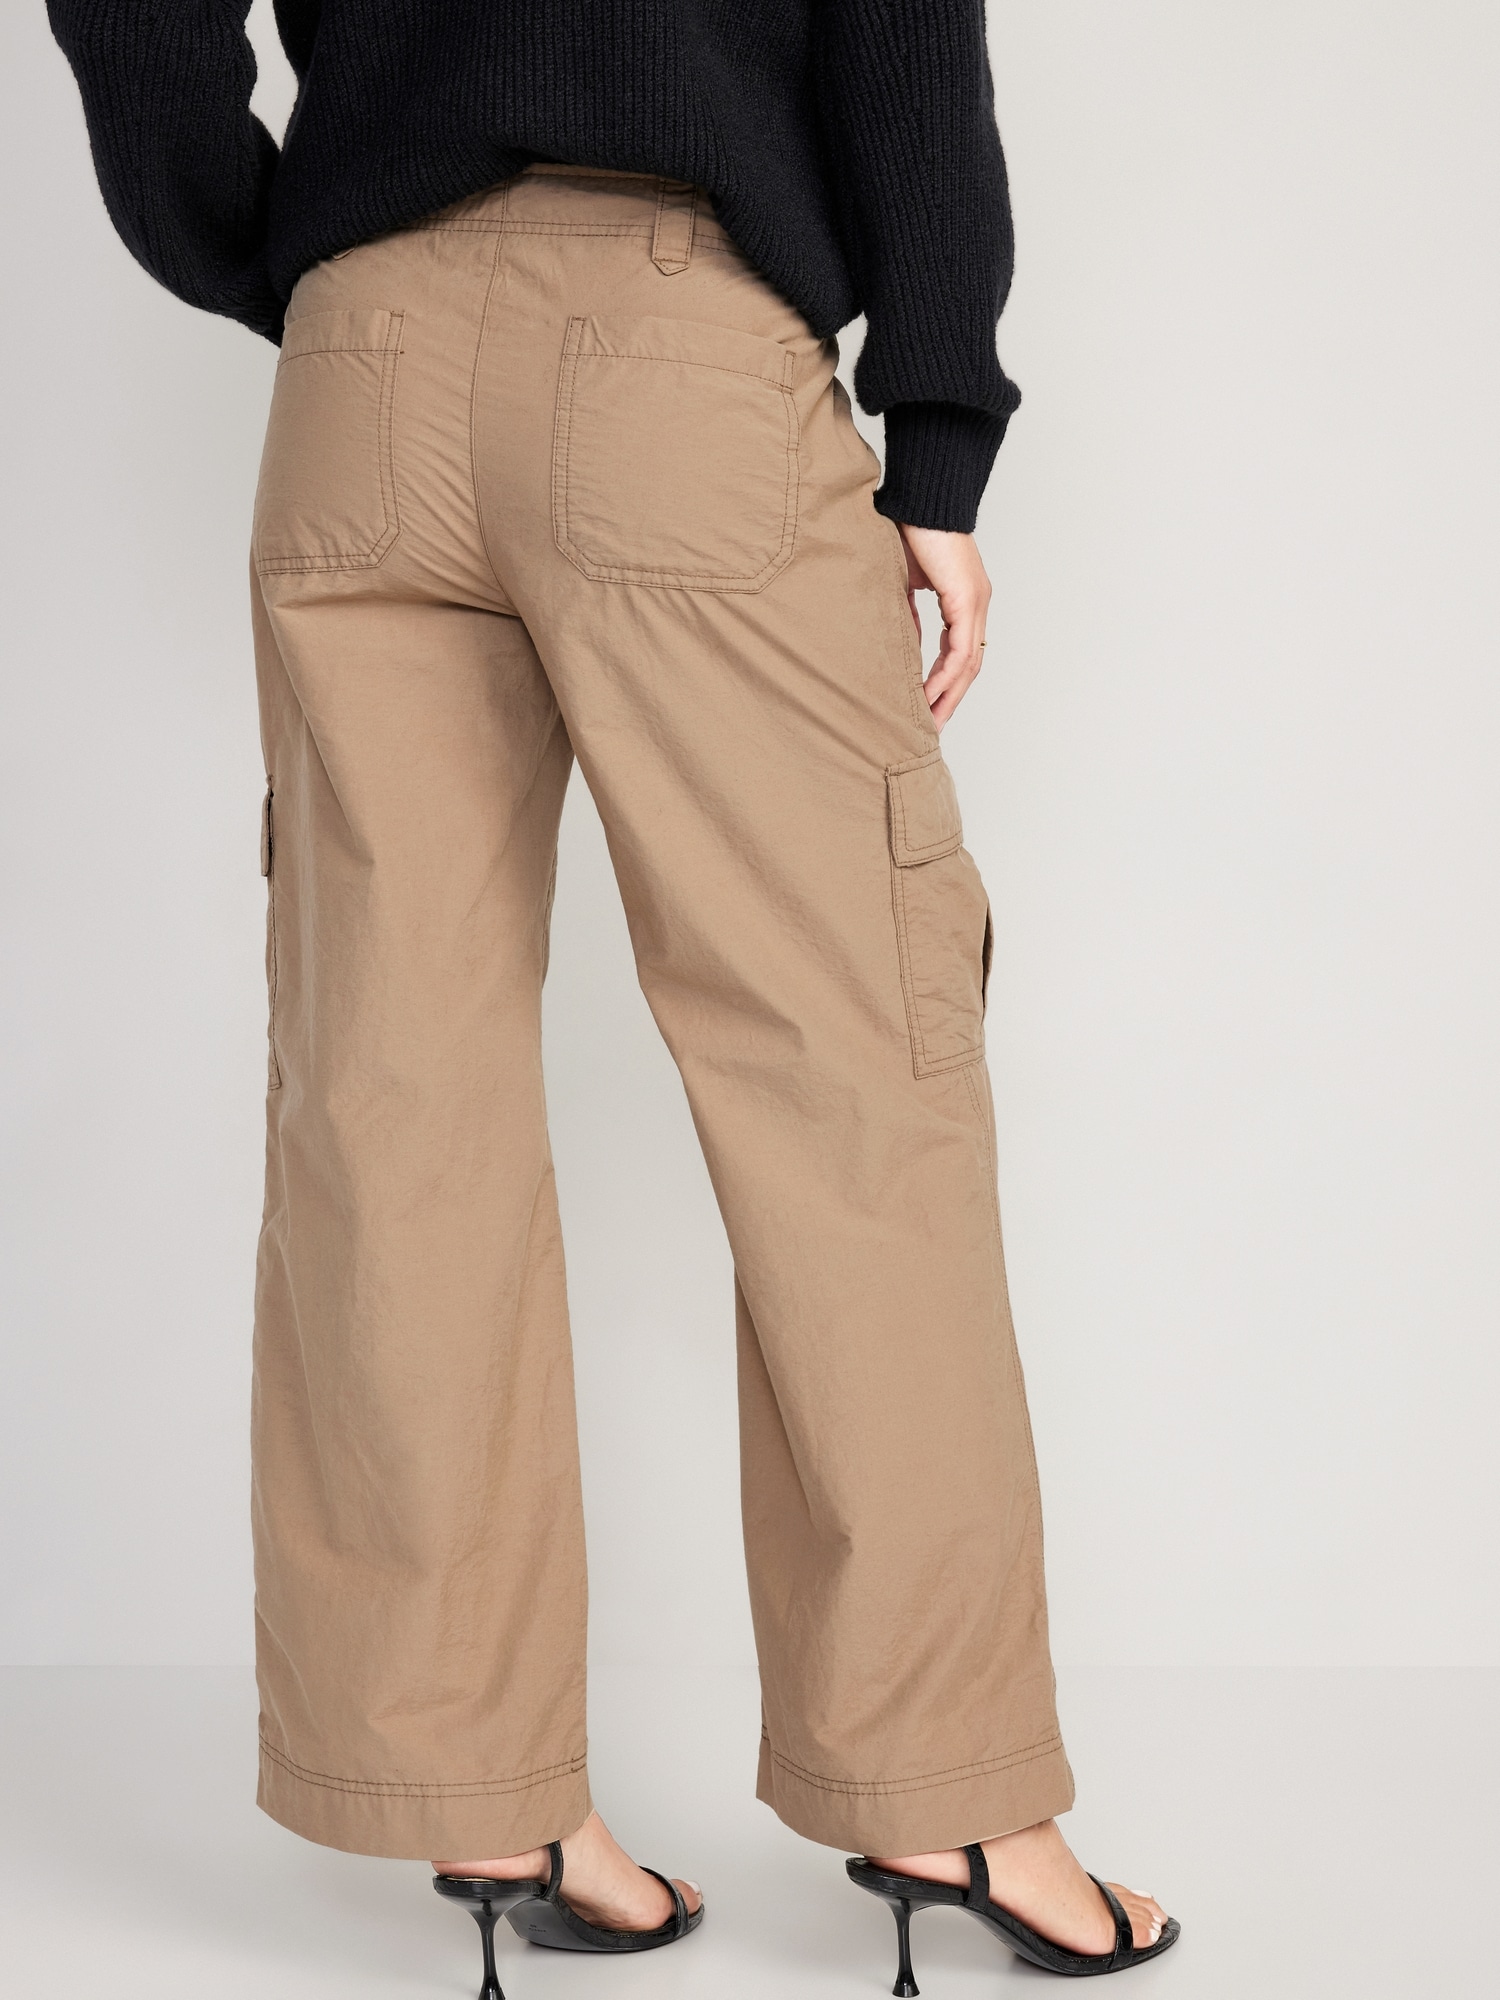  Pants Baggy Cargo Pants for Women Adjustable Loose Fit Straight  Leg Cargo Trousers Lightweight Solid Pants with Pockets Cargo Pants Women  Baggy : Clothing, Shoes & Jewelry